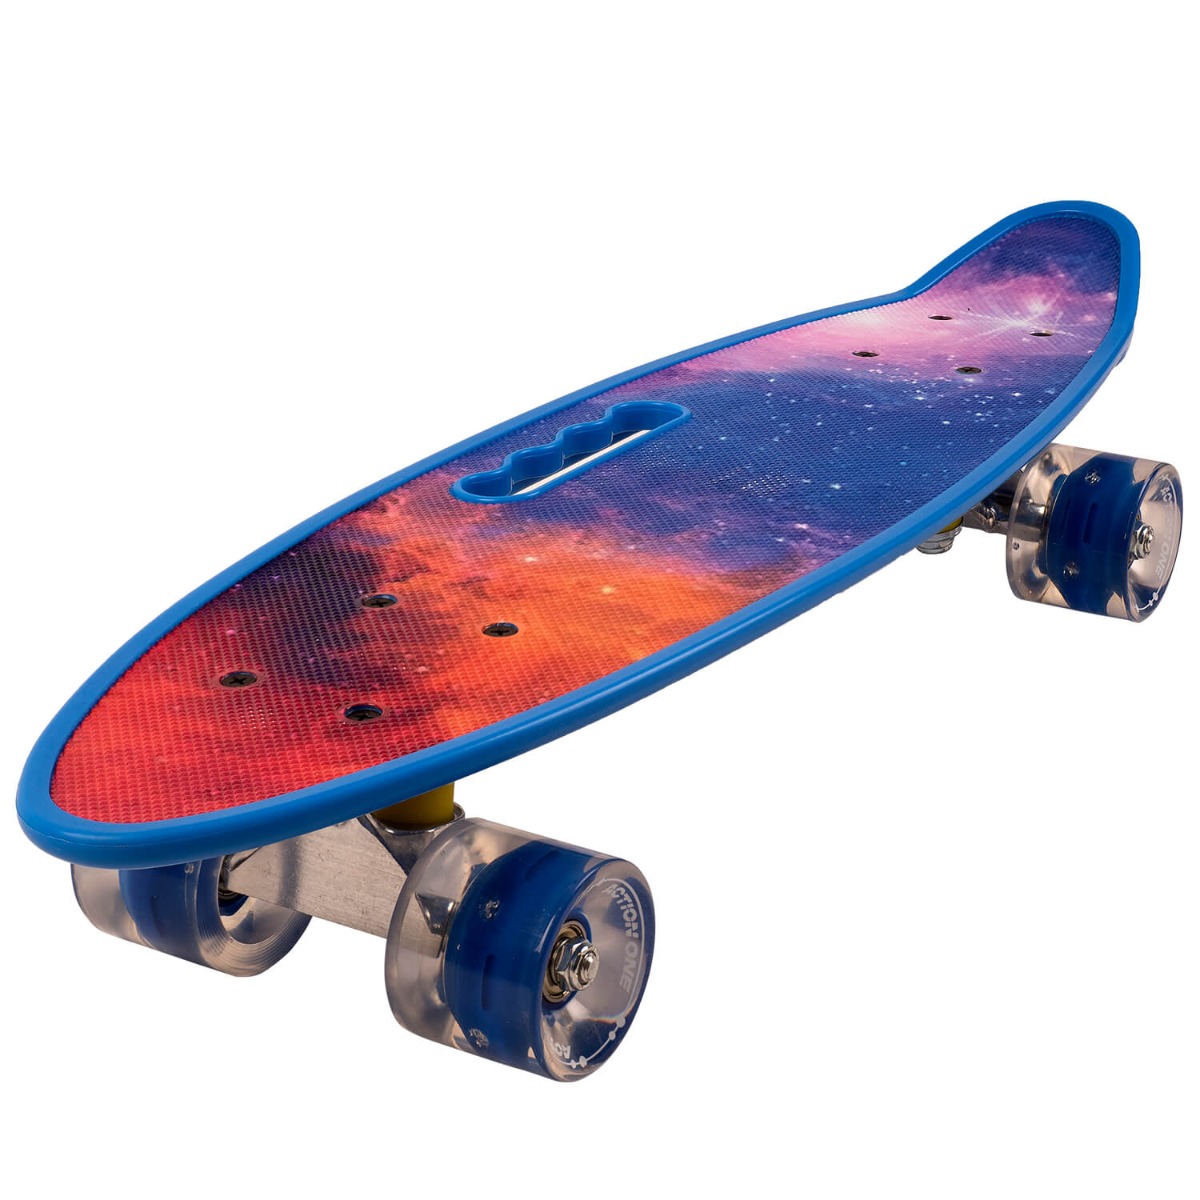 Penny board portabil Action One, ABEC-7 PU, Aluminiu, Cosmos Action One